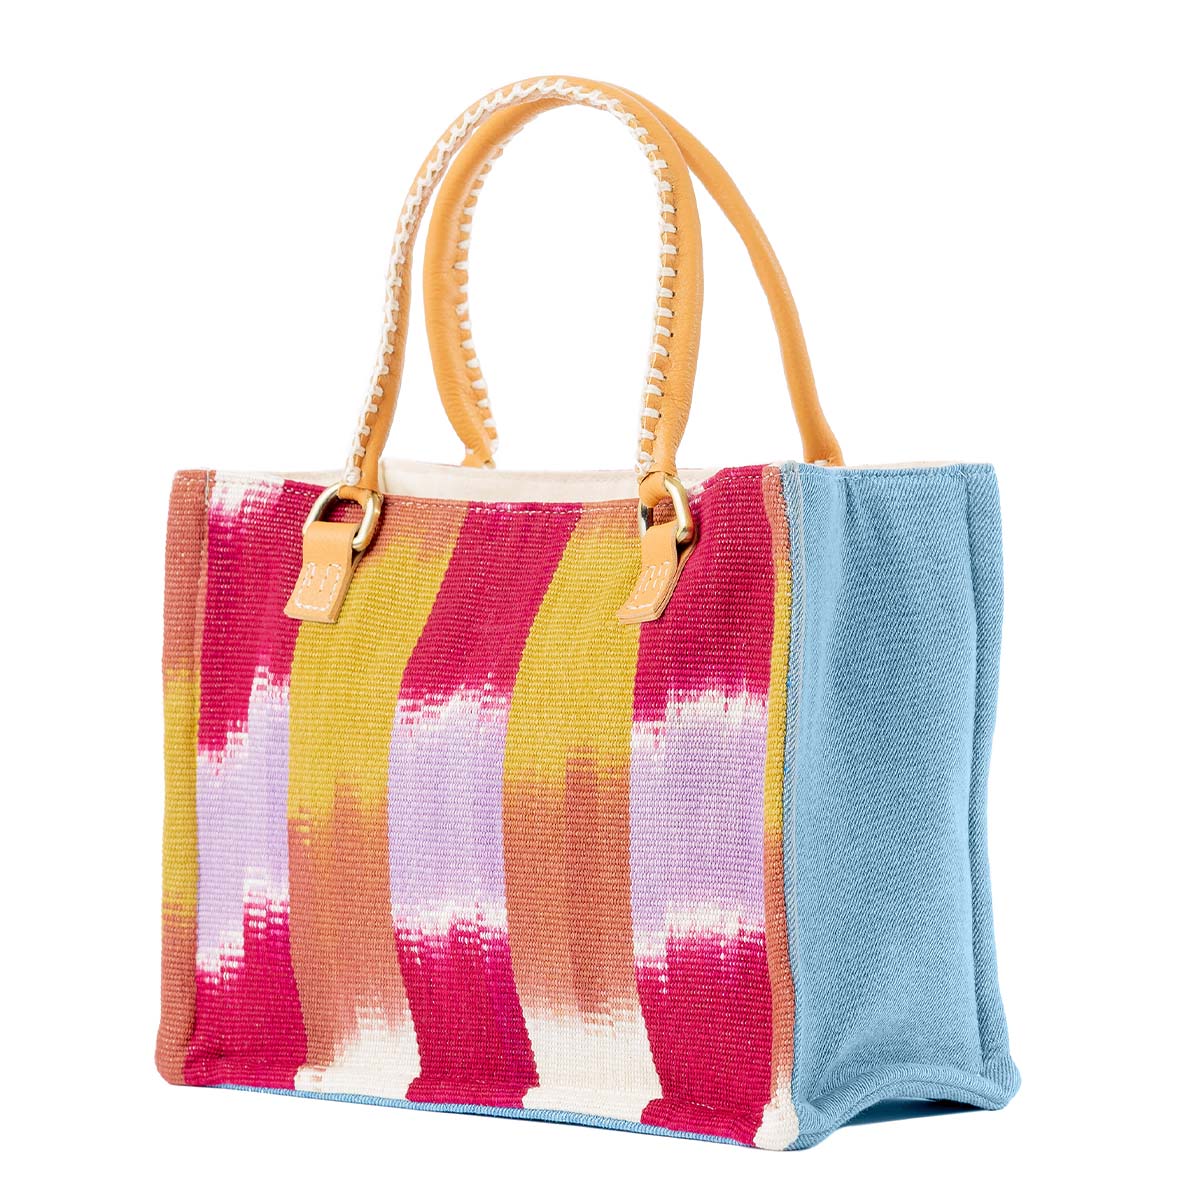 An angle of the Mini Irma Tote in Raspberry Paleta.  It has a watercolor red, orange, yellow, purple, and white stripes. The sides are sky blue. It has leather handles with white embroidery.